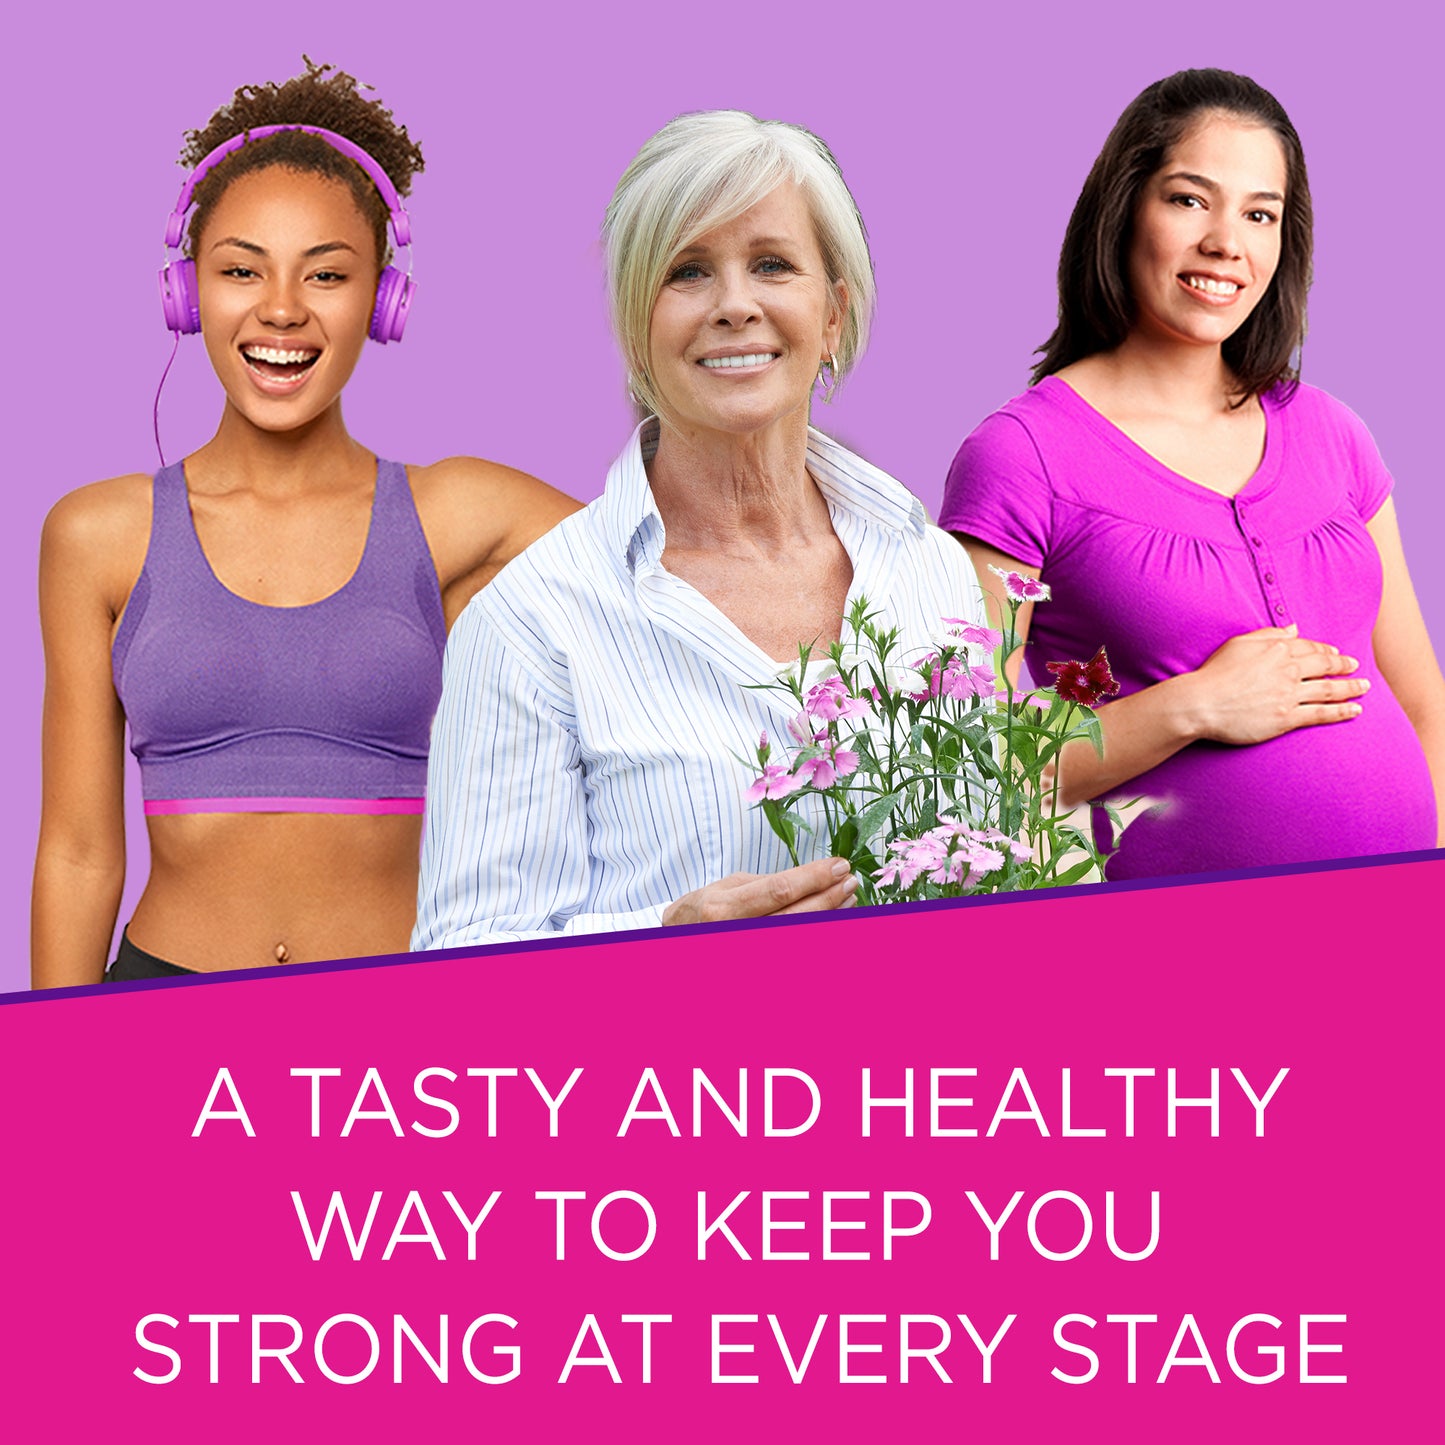 Three women in different stages of life showing that Viactiv is a tasty way to keep you strong at every stage